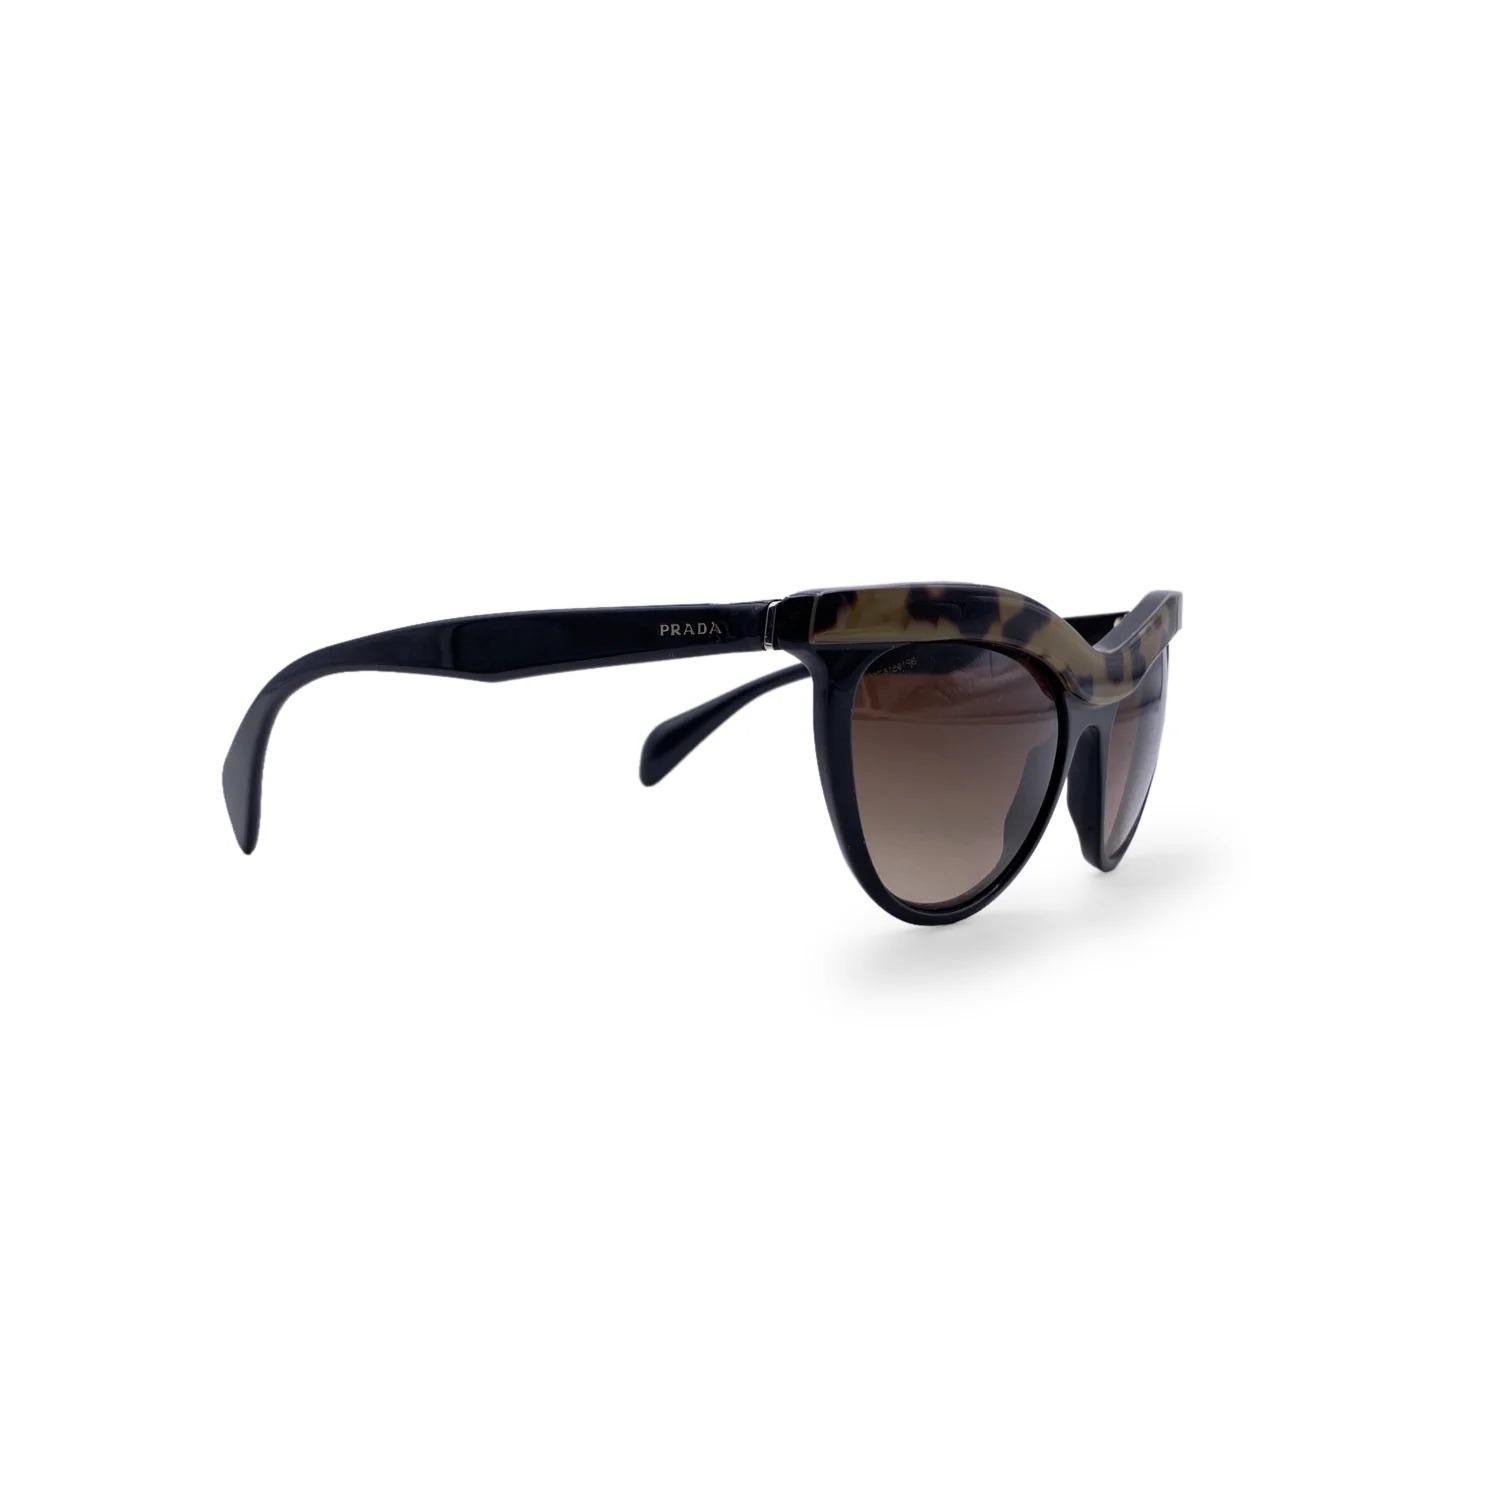 Beautiful sunglasses by Prada, mod. SPR 06P col.MA5-6S1. Cat- eye shape in black and spotted acetate. Logo on the temples and gradient brown lenses. Mod & refs.: mod. SPR 06P col.MA5-6S1 - 54/19 - 140 - 3N. Made in Italy Details MATERIAL: Acetate